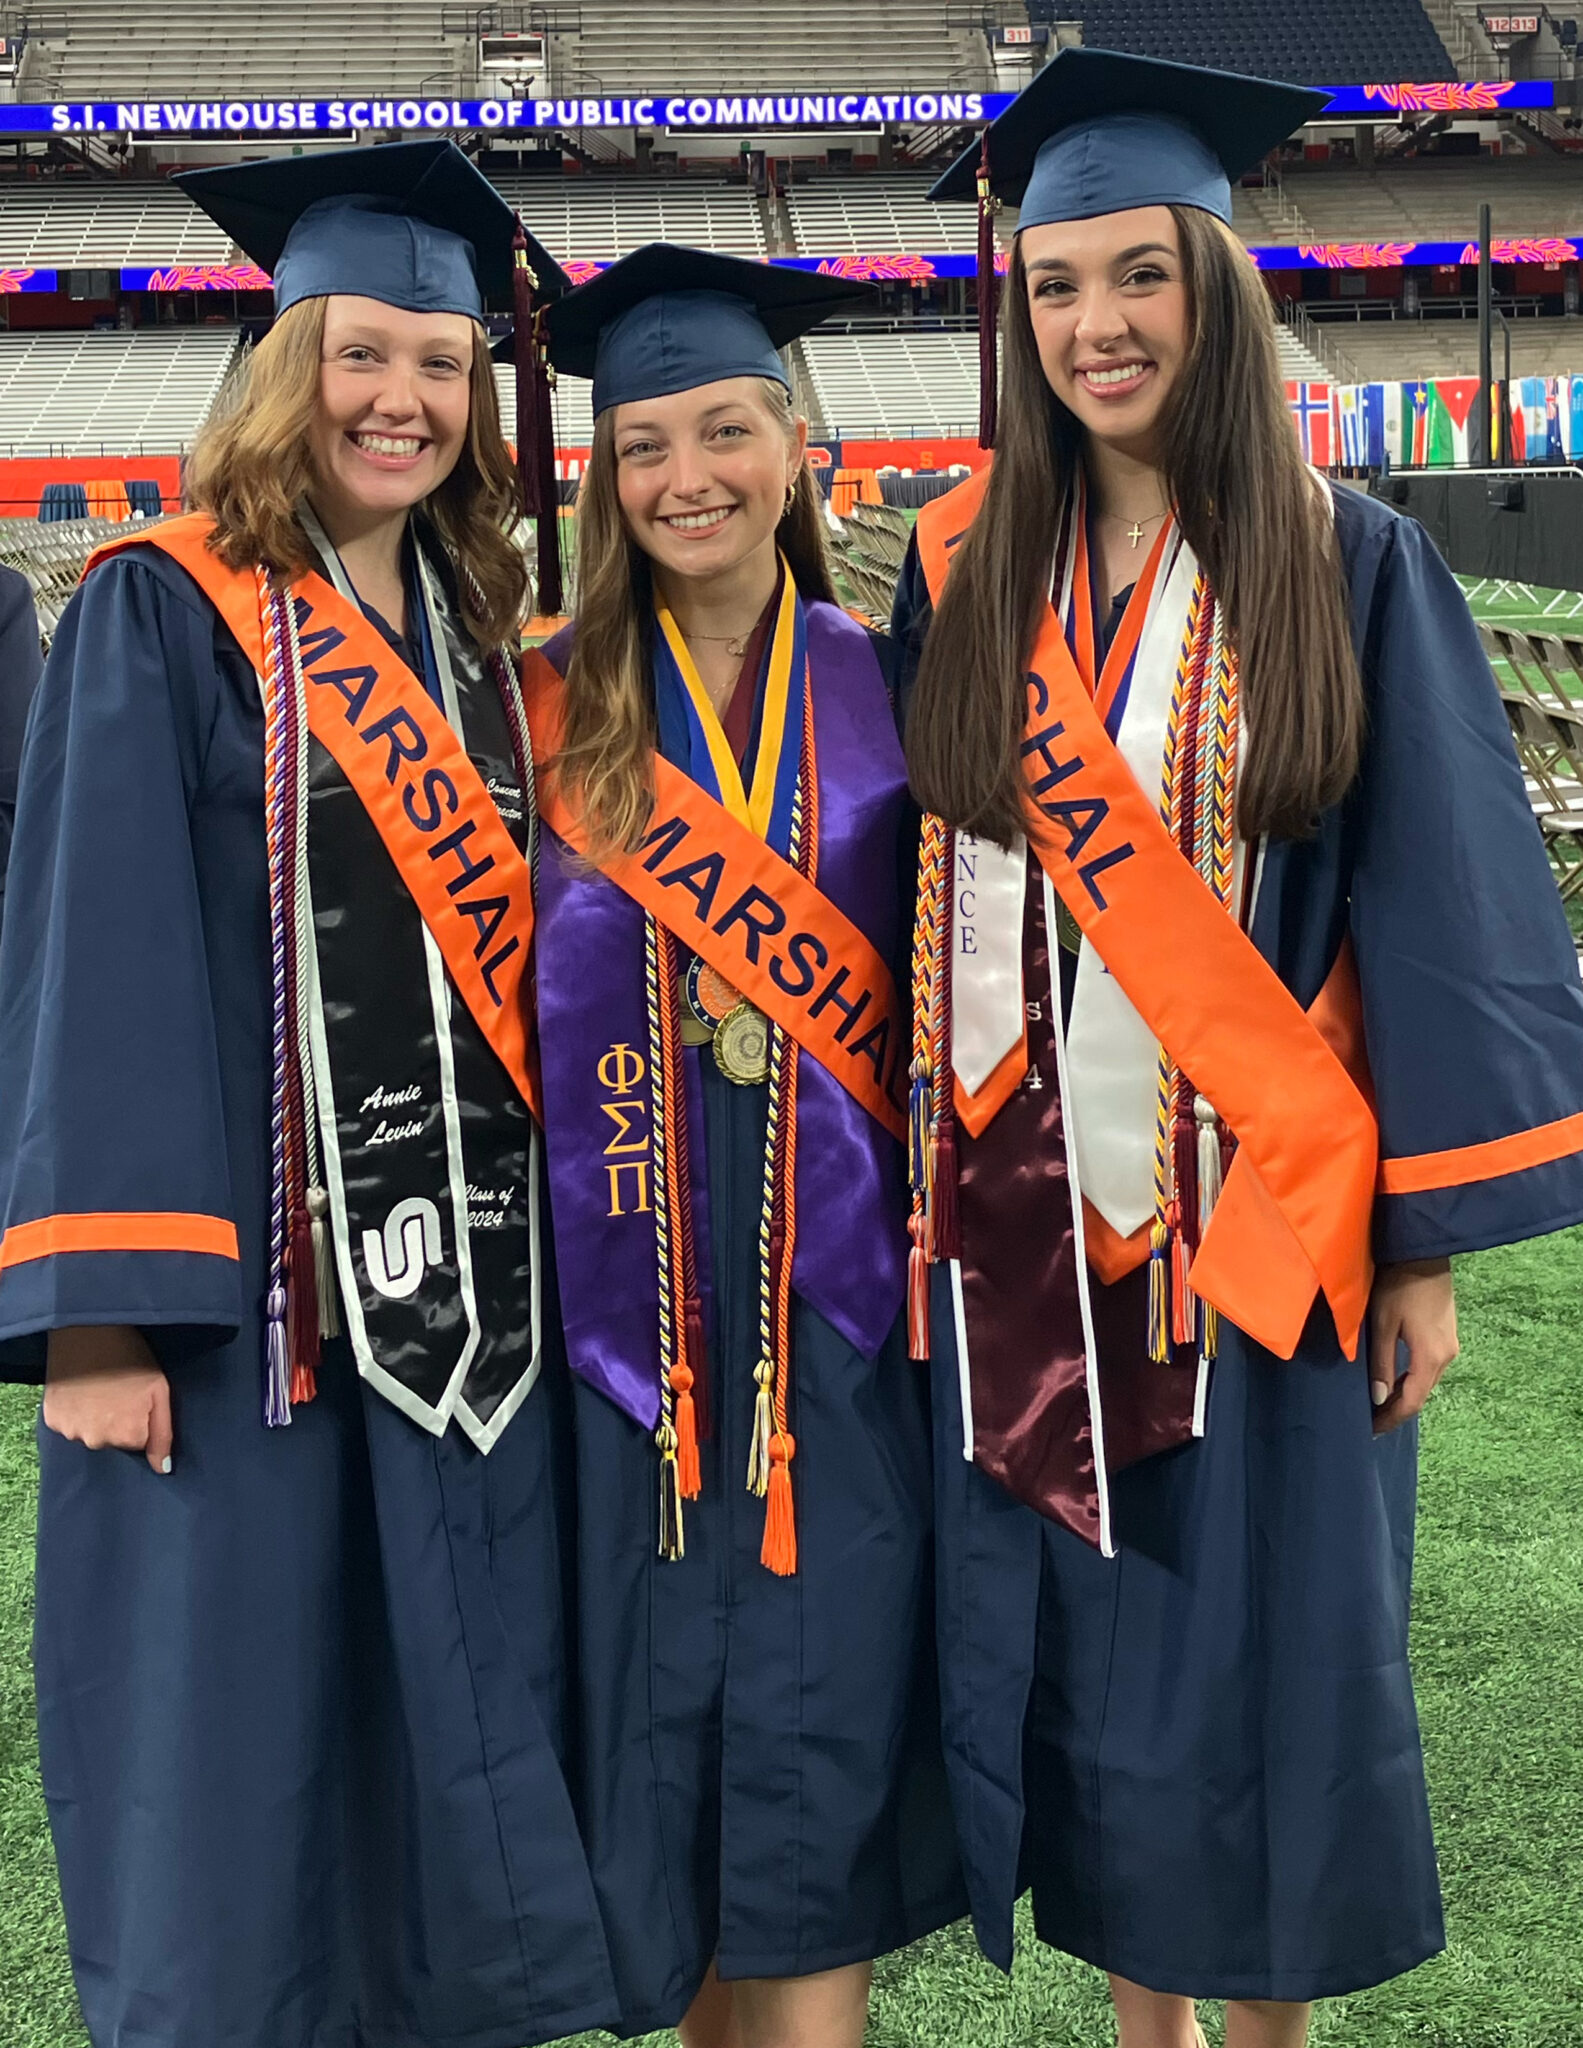 Three women dressed in graduation caps and gowns pose for a photo